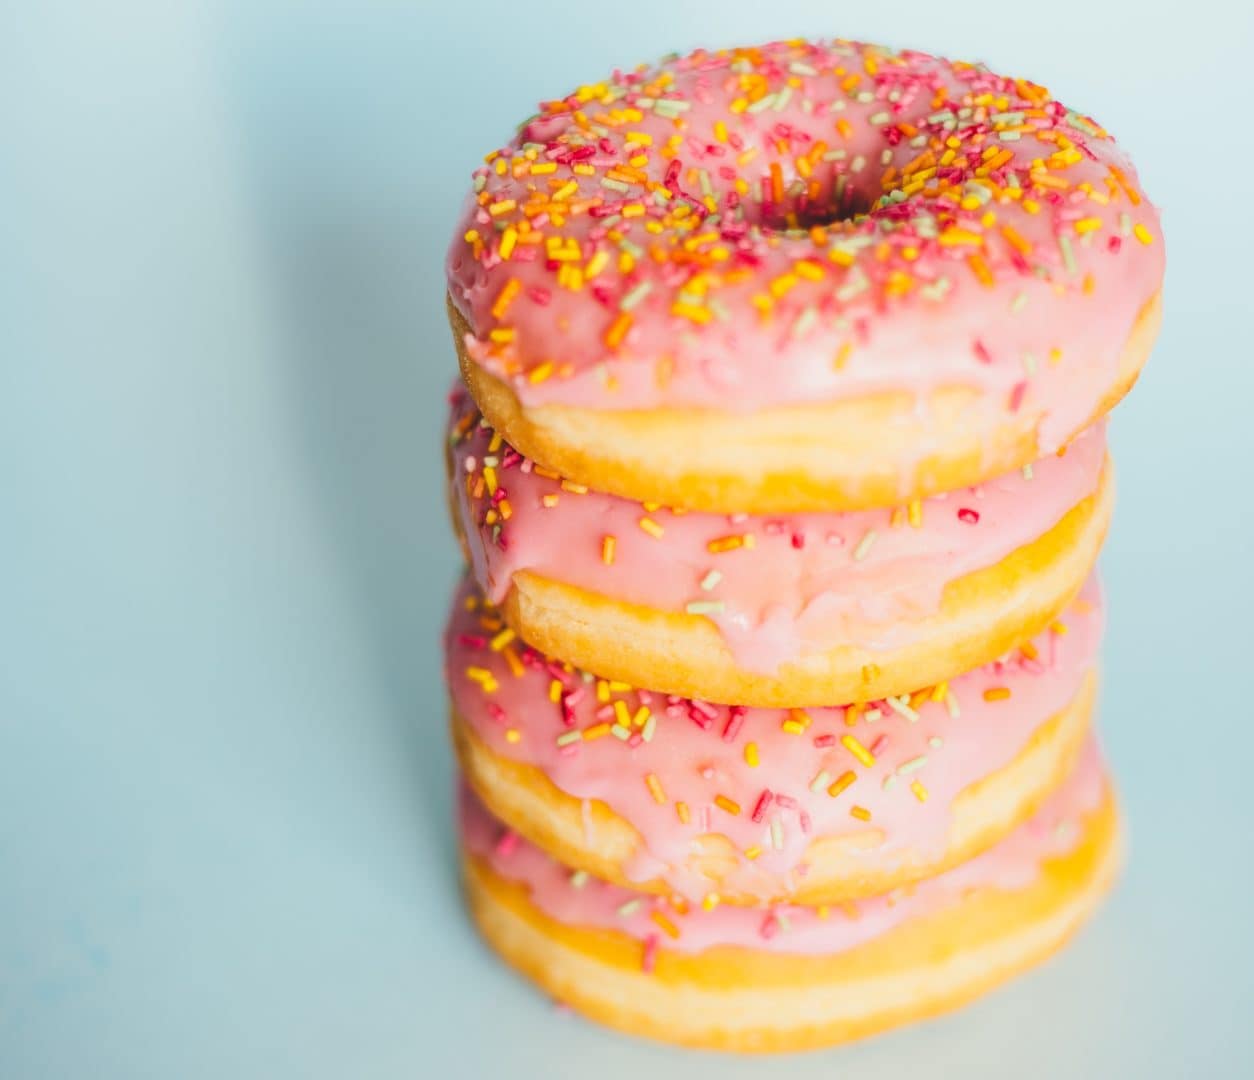 The 10 Best Donut Shops for Chicago Families